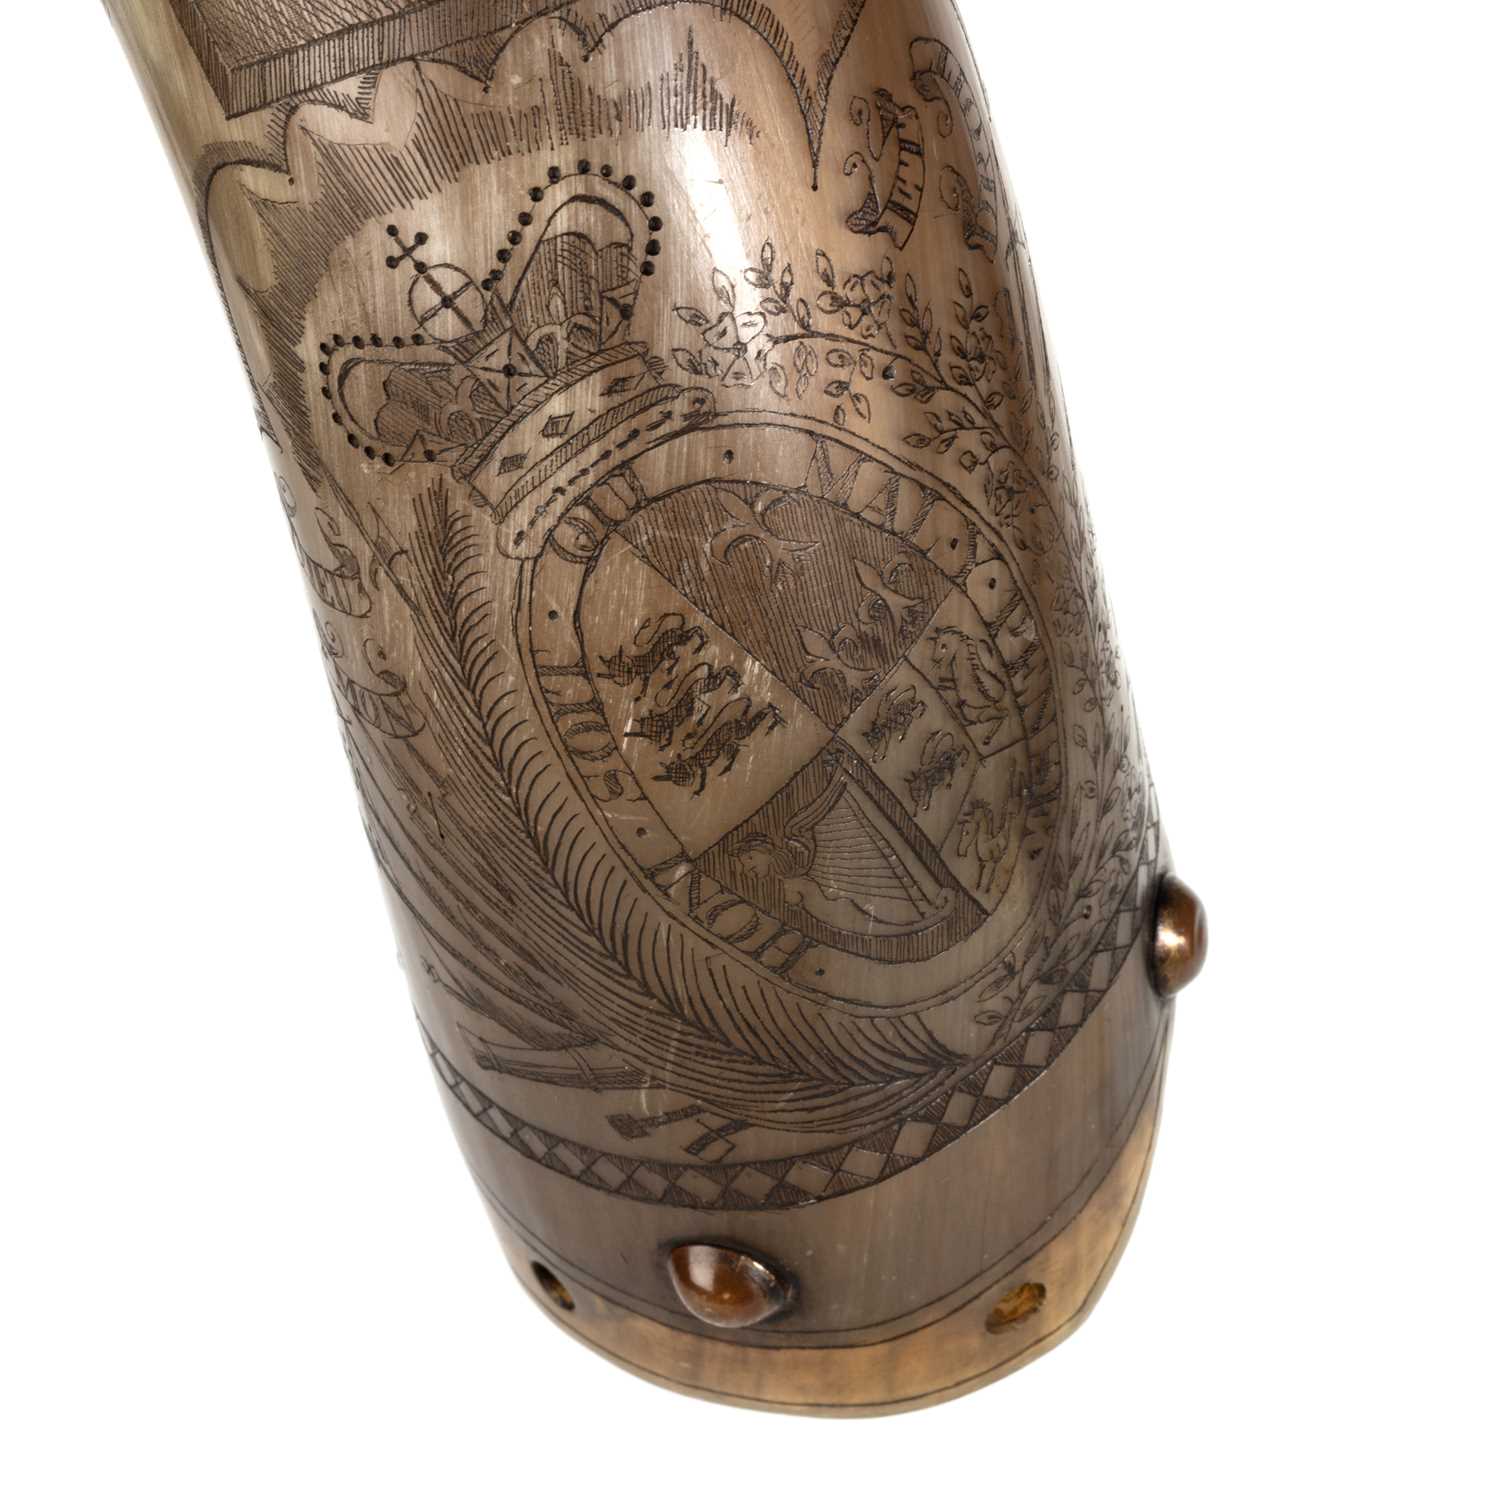 A SCRIMSHAW DECORATED POWDER HORN - Image 6 of 6